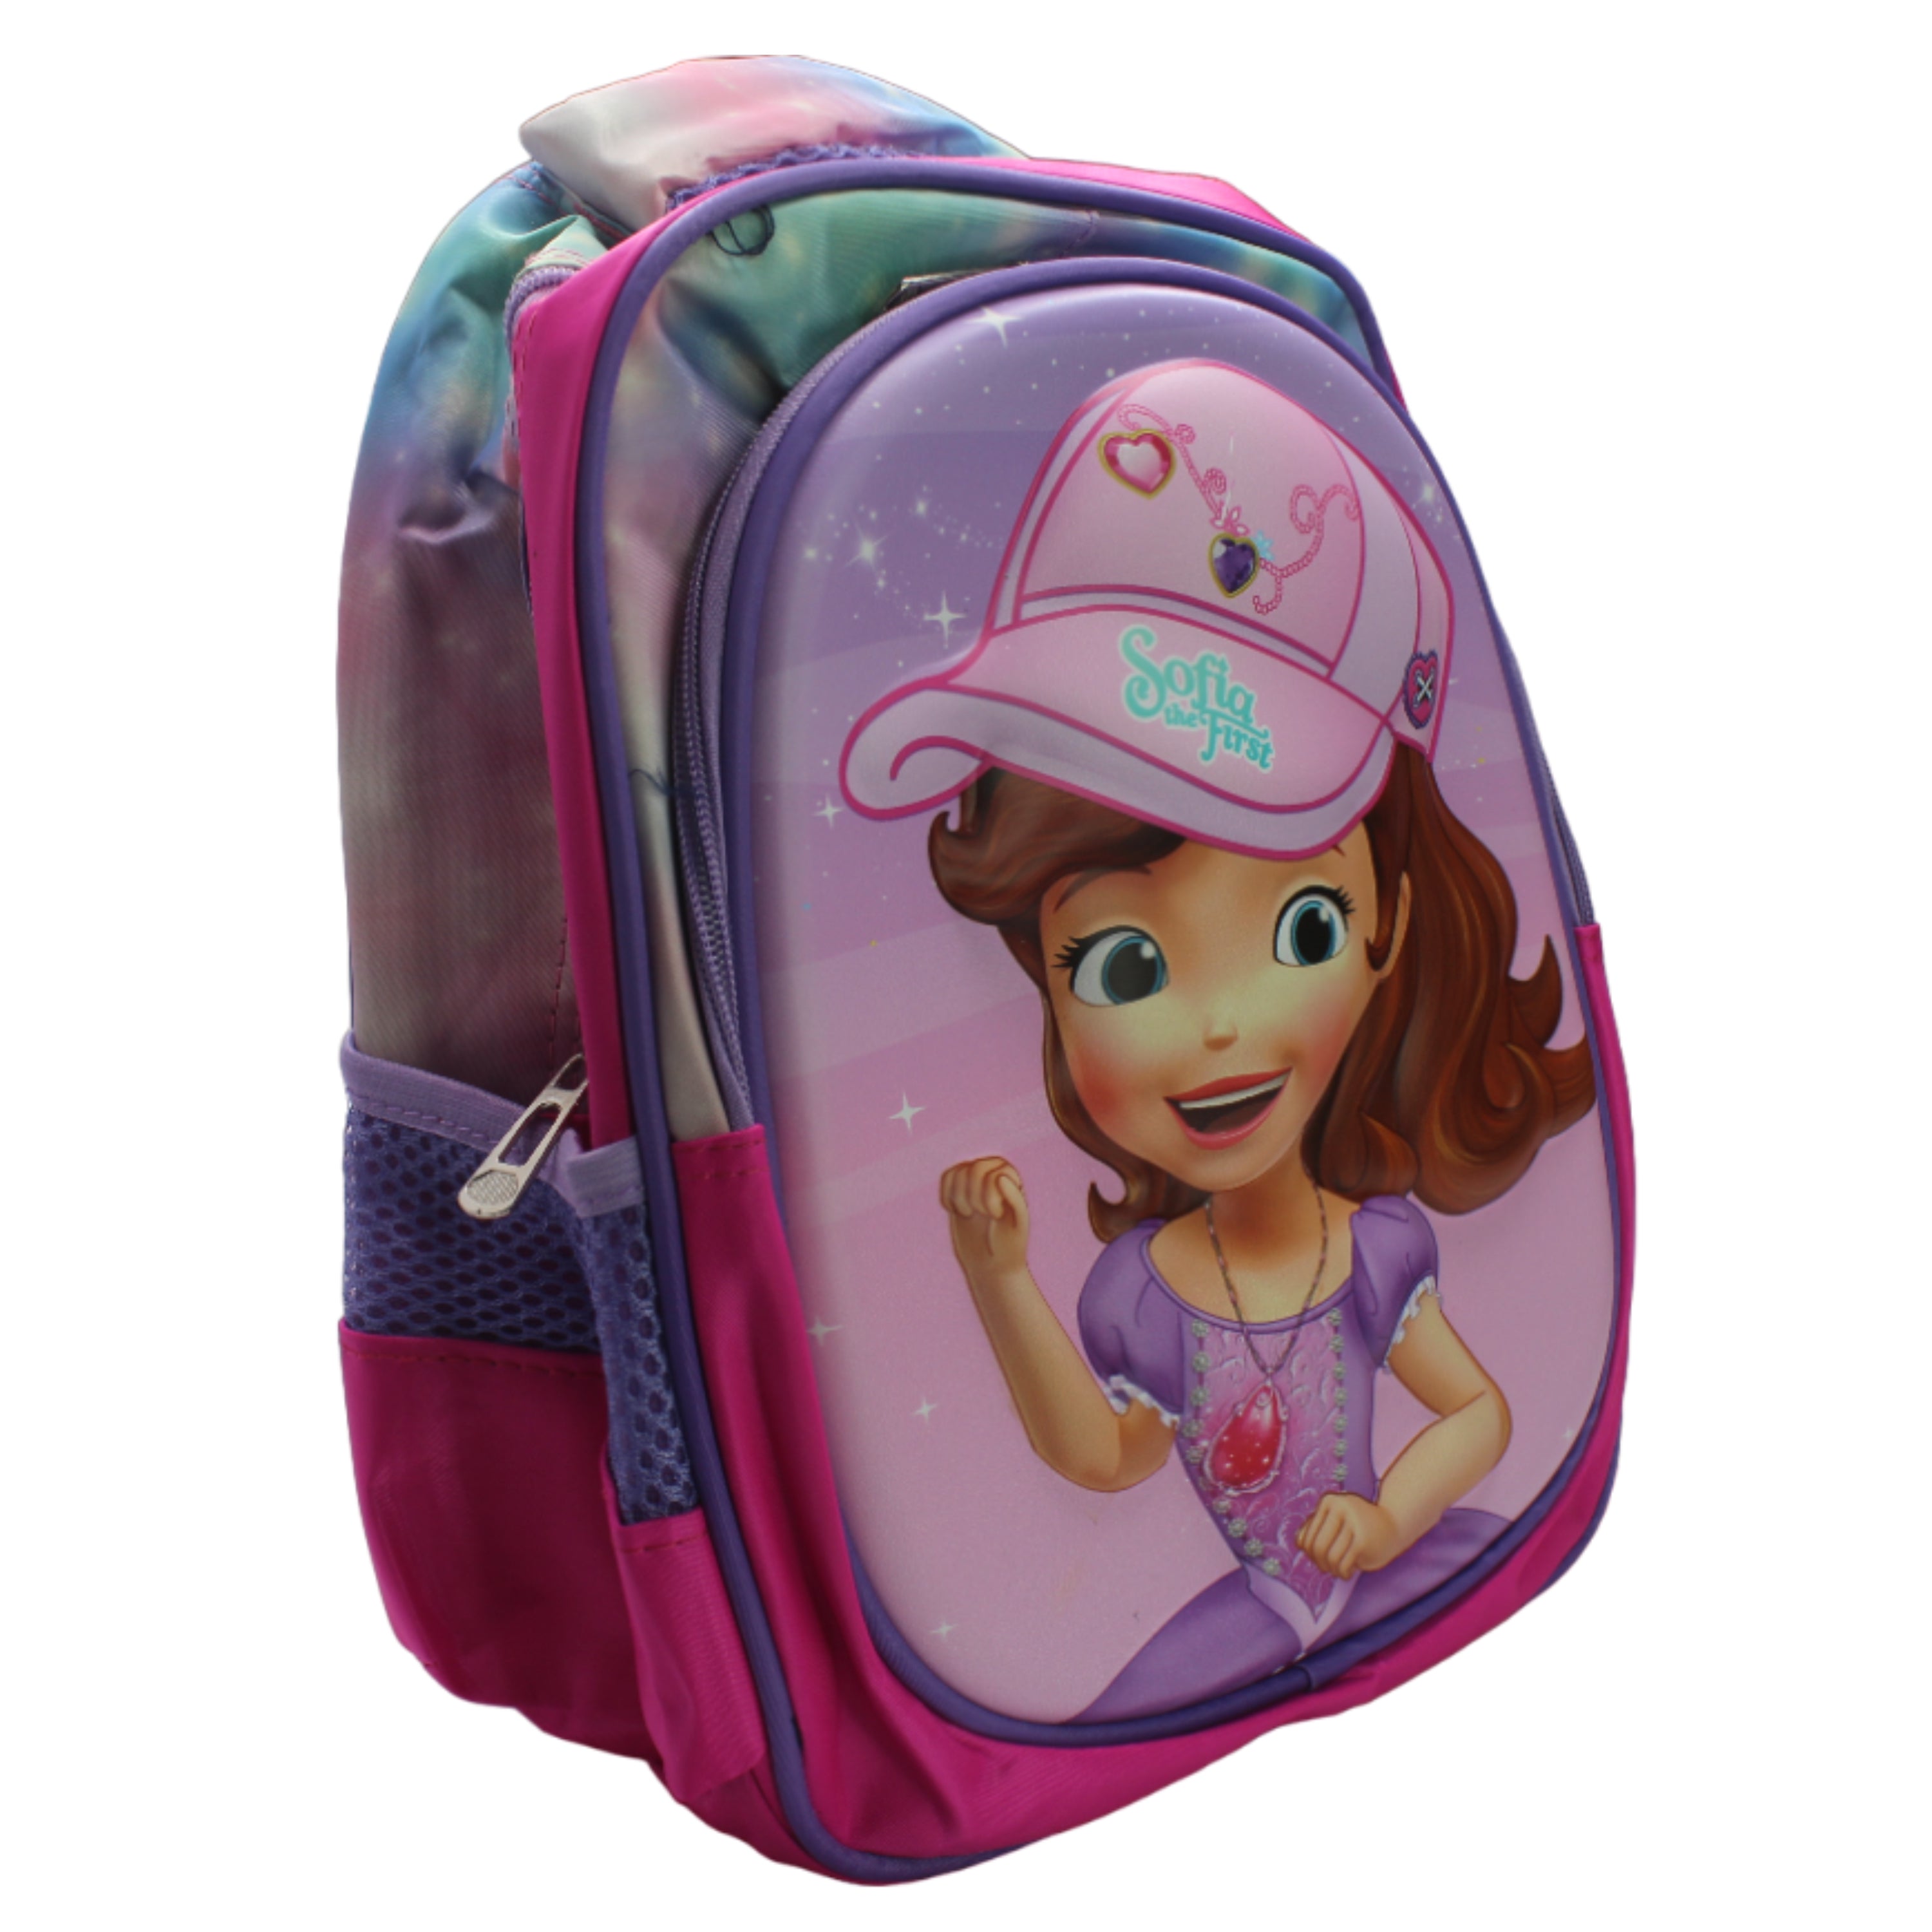 Sofia the First School Bag for Girls Class 1 to 2